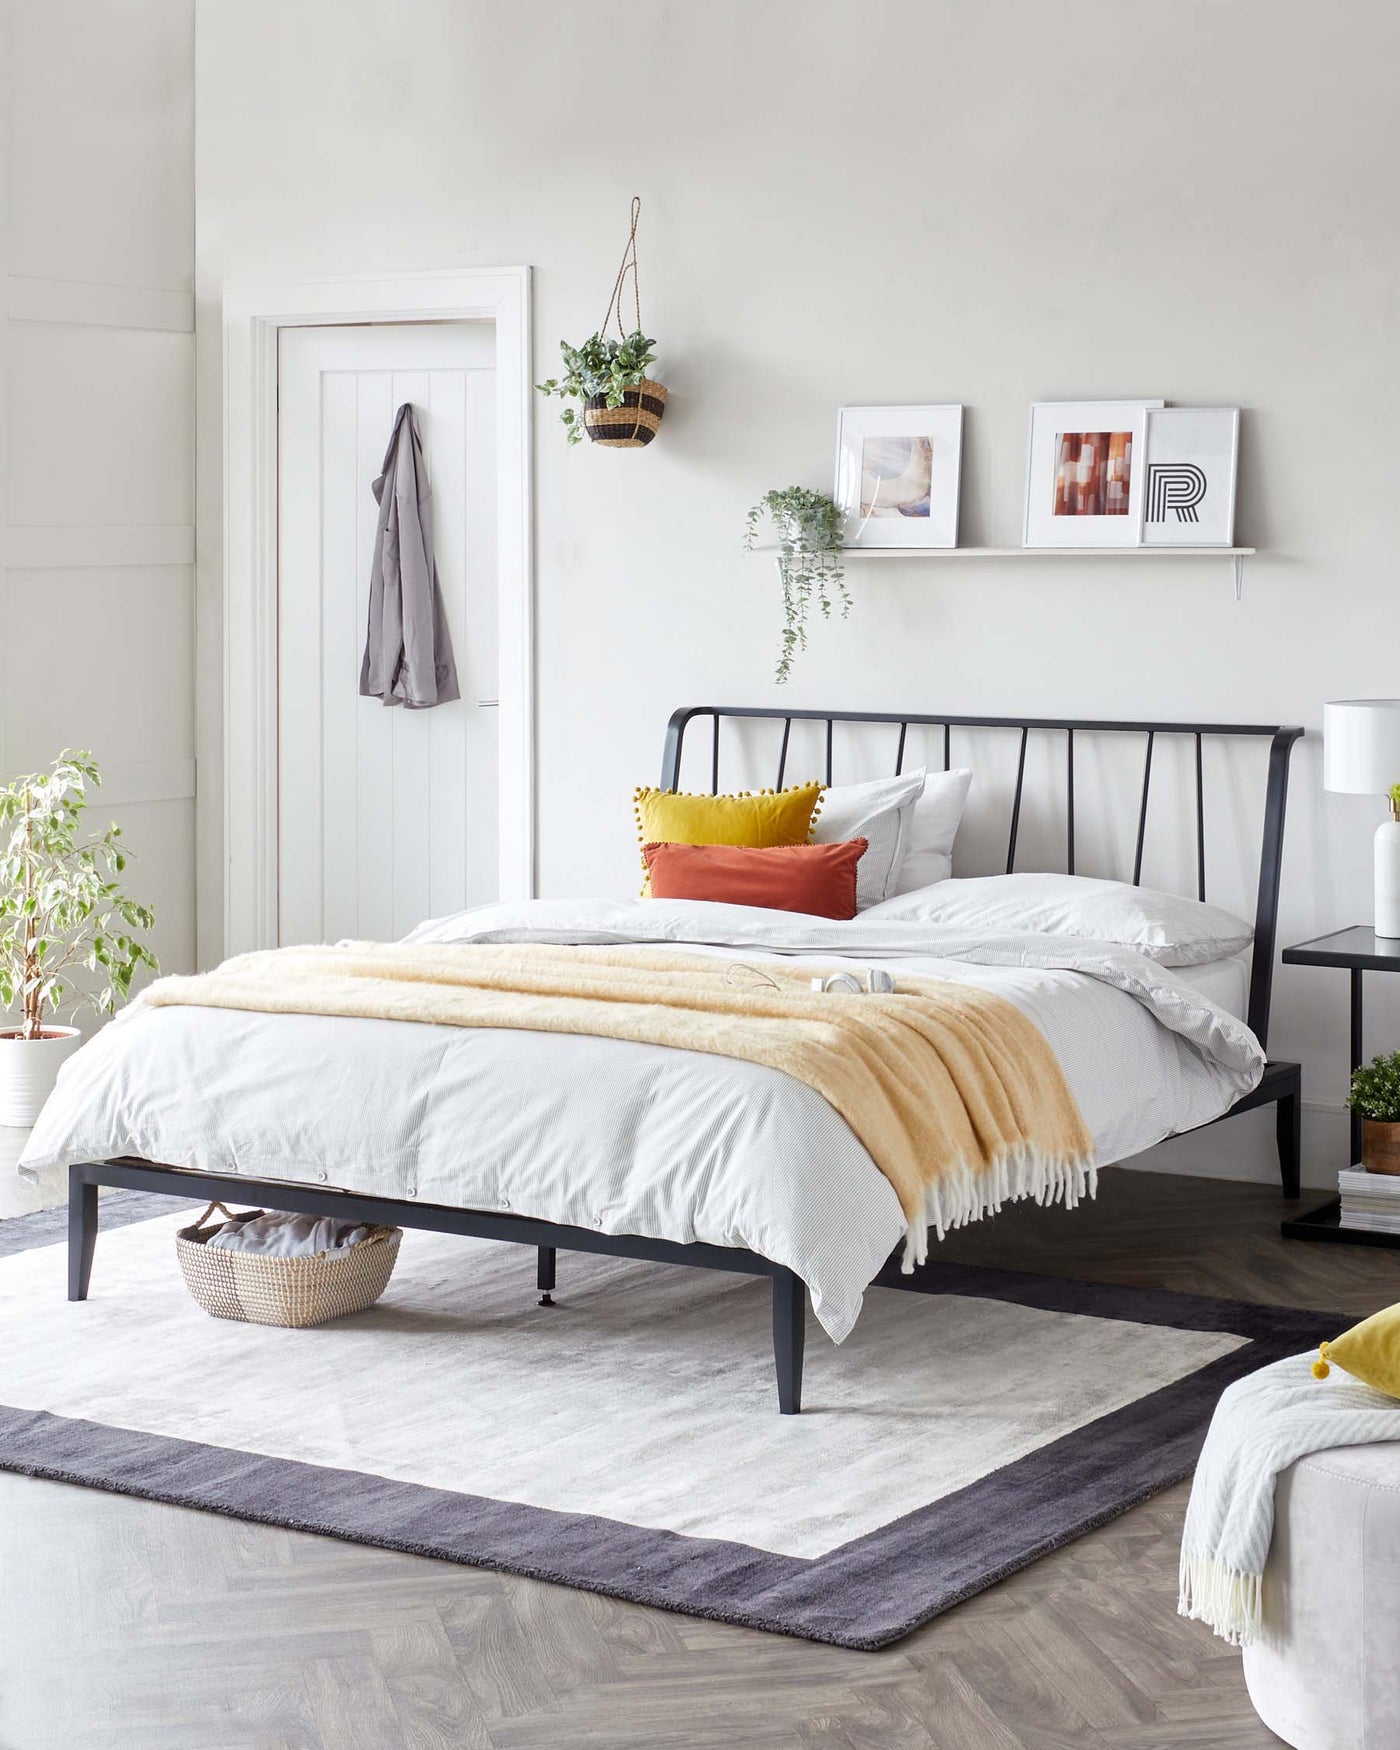 A modern minimalist bedroom featuring a sleek, black metal frame bed with a clean headboard design, paired with a neutral white bedding set with a cosy beige throw blanket and decorative pillows in yellow and red. Beside the bed is a round, black metal side table with a simple white lamp. A long floating shelf above the bed displays framed artwork and greenery. A woven basket sits underneath the bed, and the room is anchored by a large area rug with grey colour gradations.